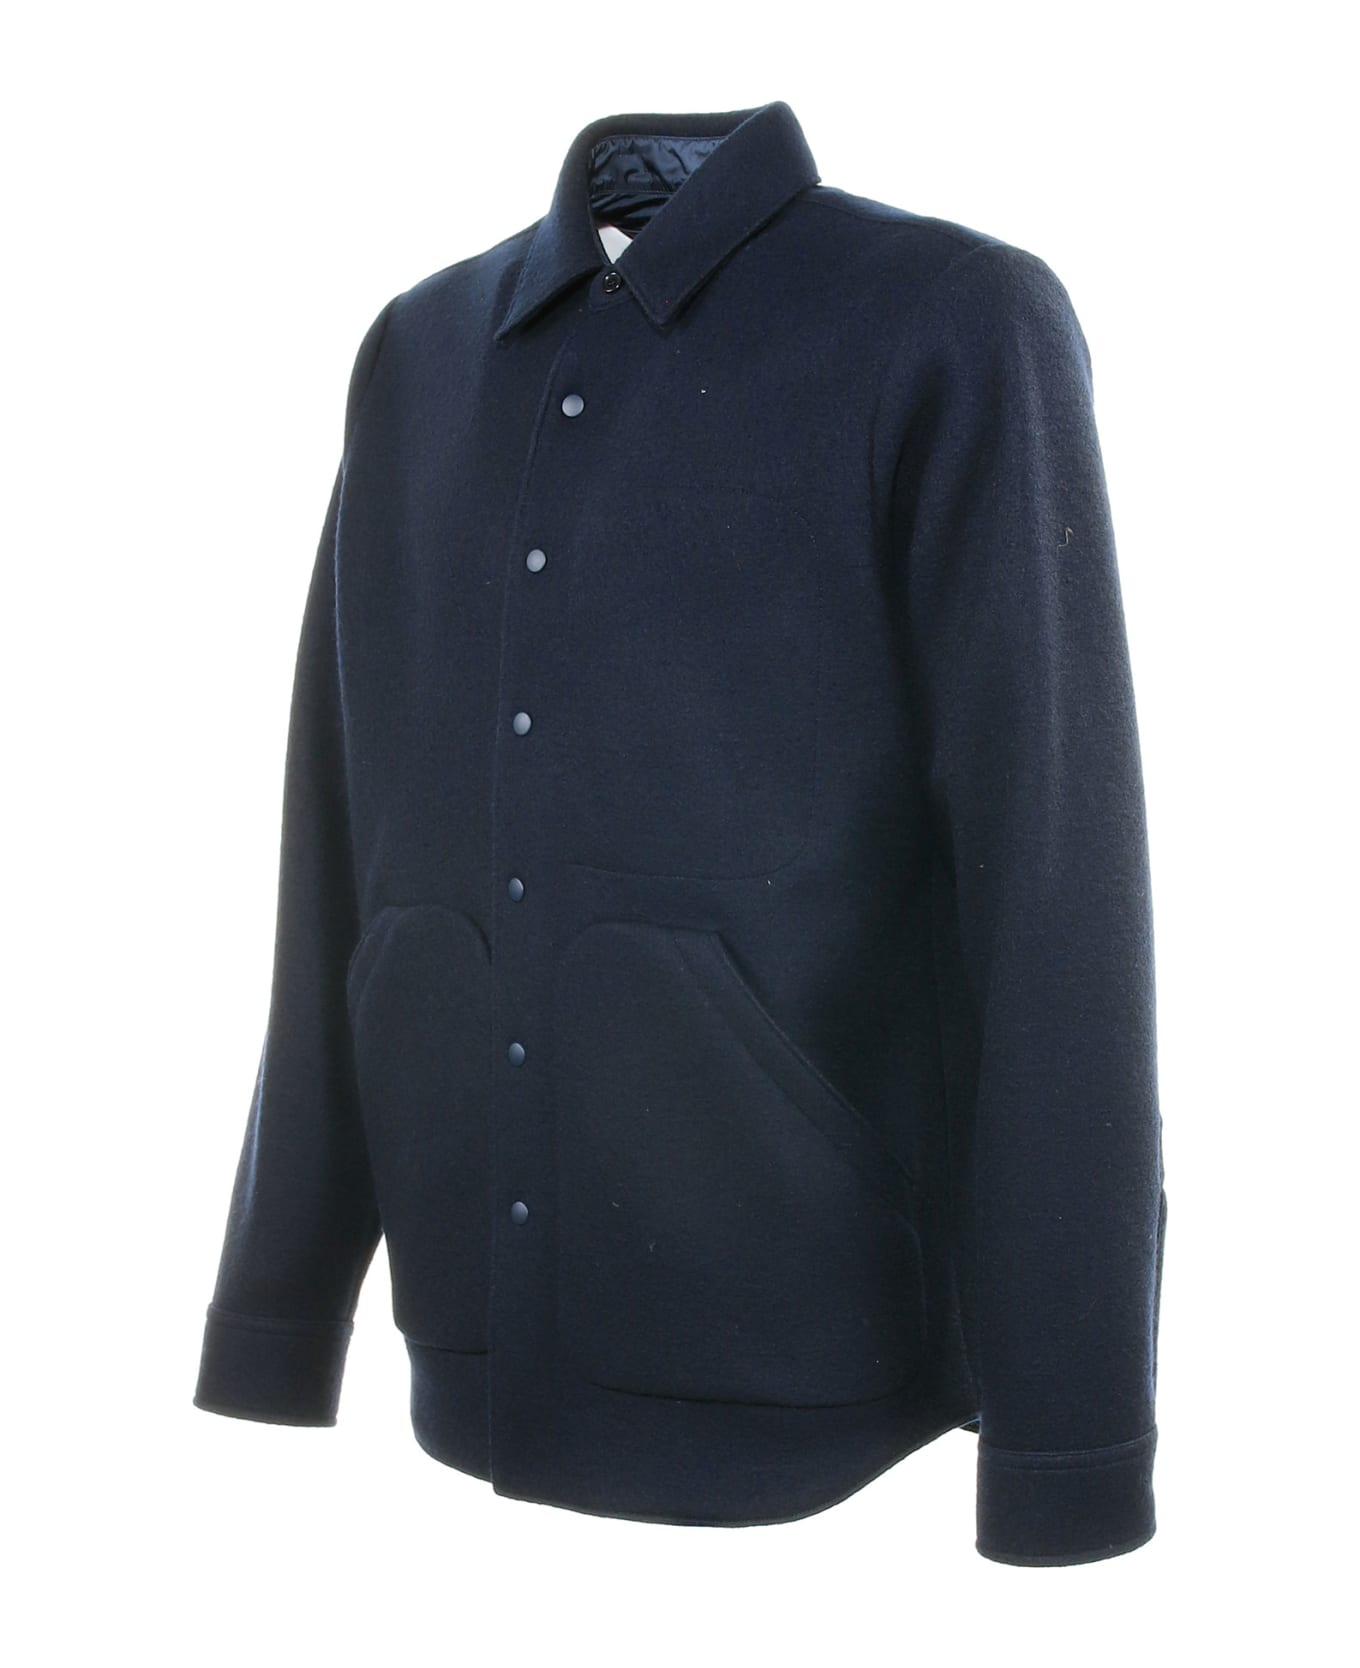 Aspesi Jacket With Buttons - NAVY ジャケット